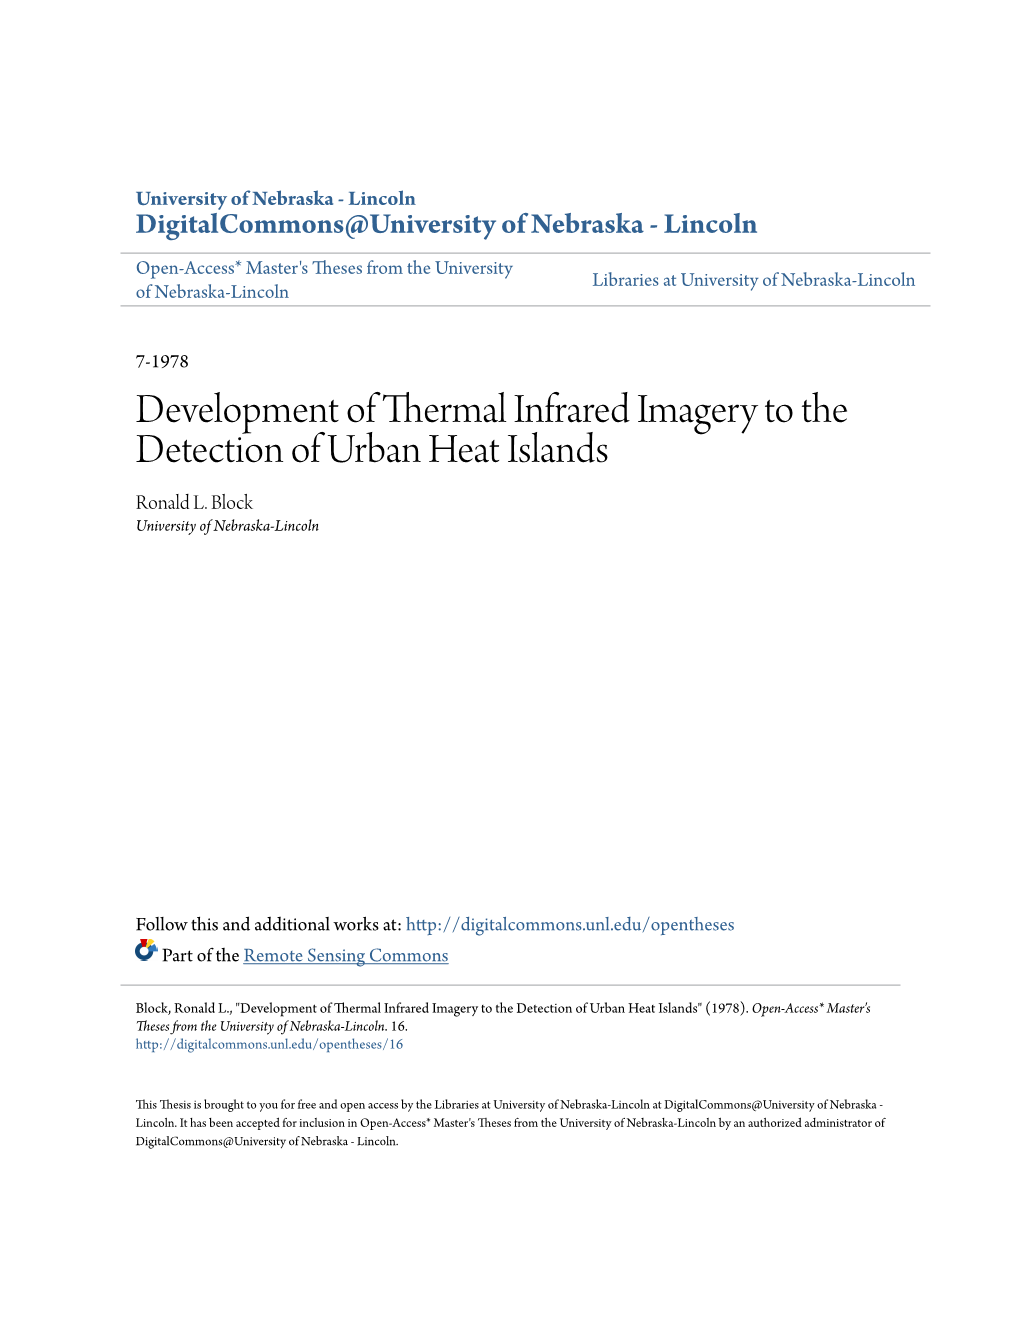 Development of Thermal Infrared Imagery to the Detection of Urban Heat Islands Ronald L